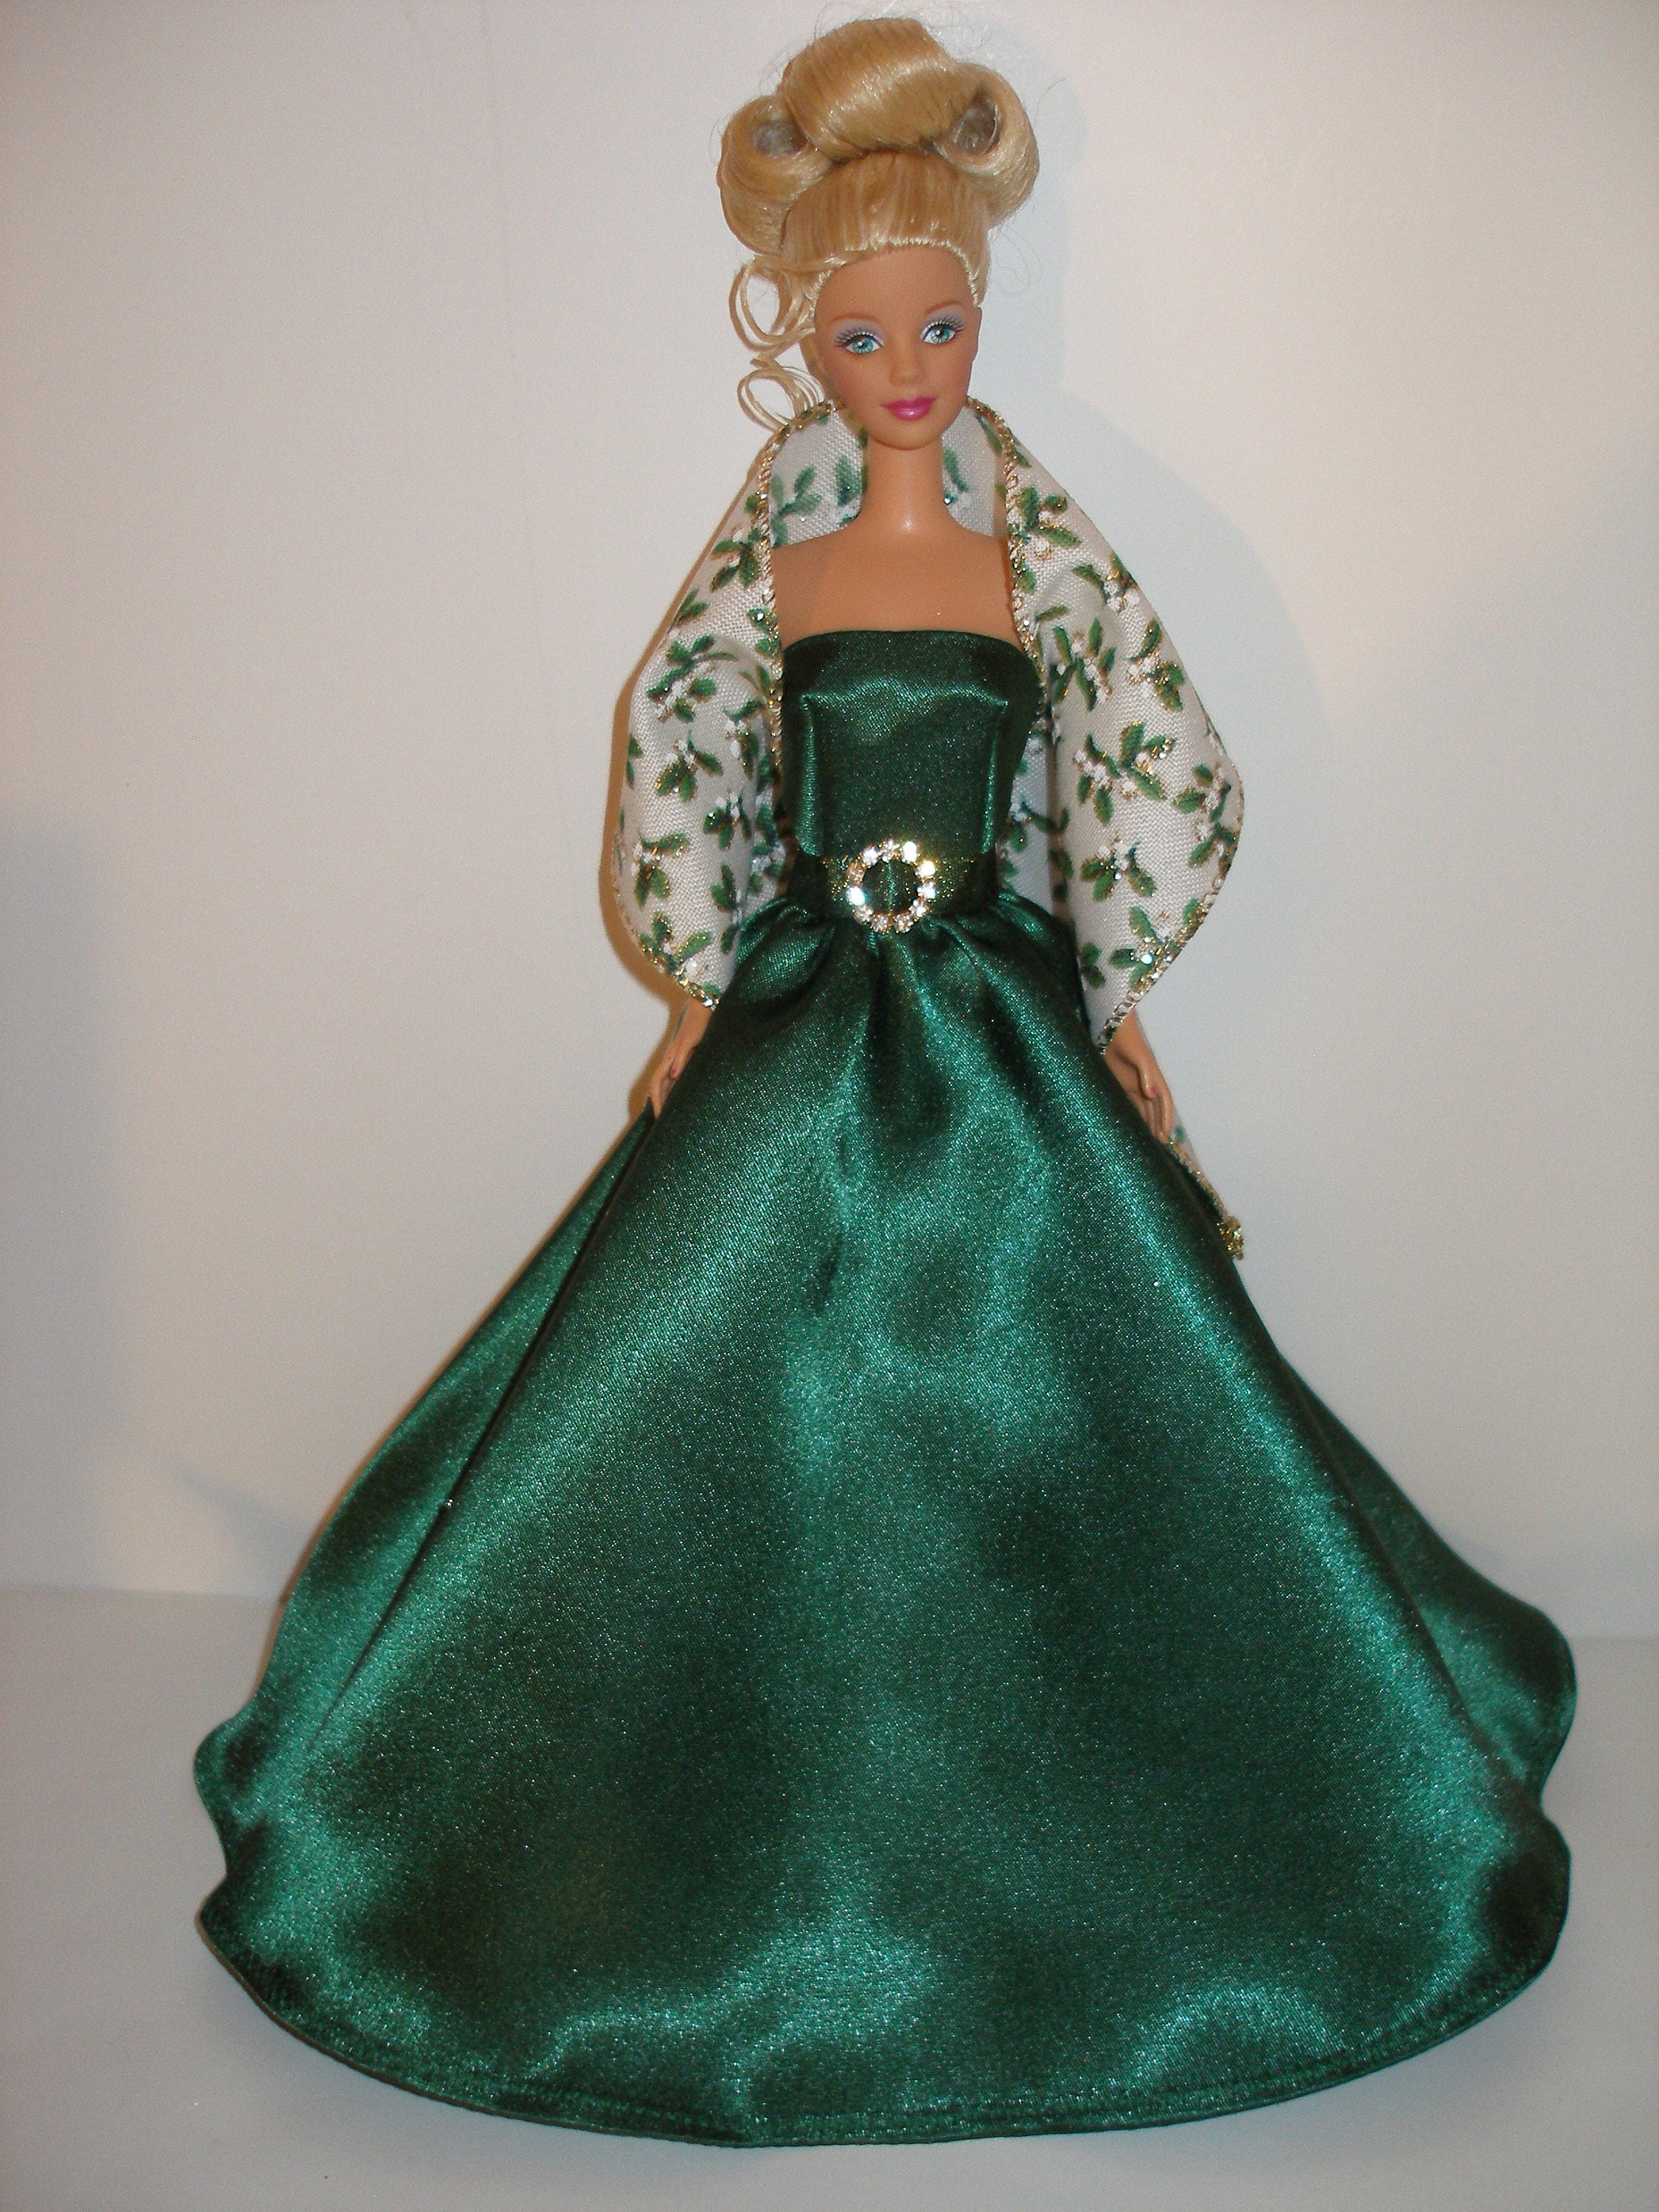 Happy Holidays Vanna White Wheel of Fortune Barbie Doll in Green Dress :  Amazon.sg: Toys